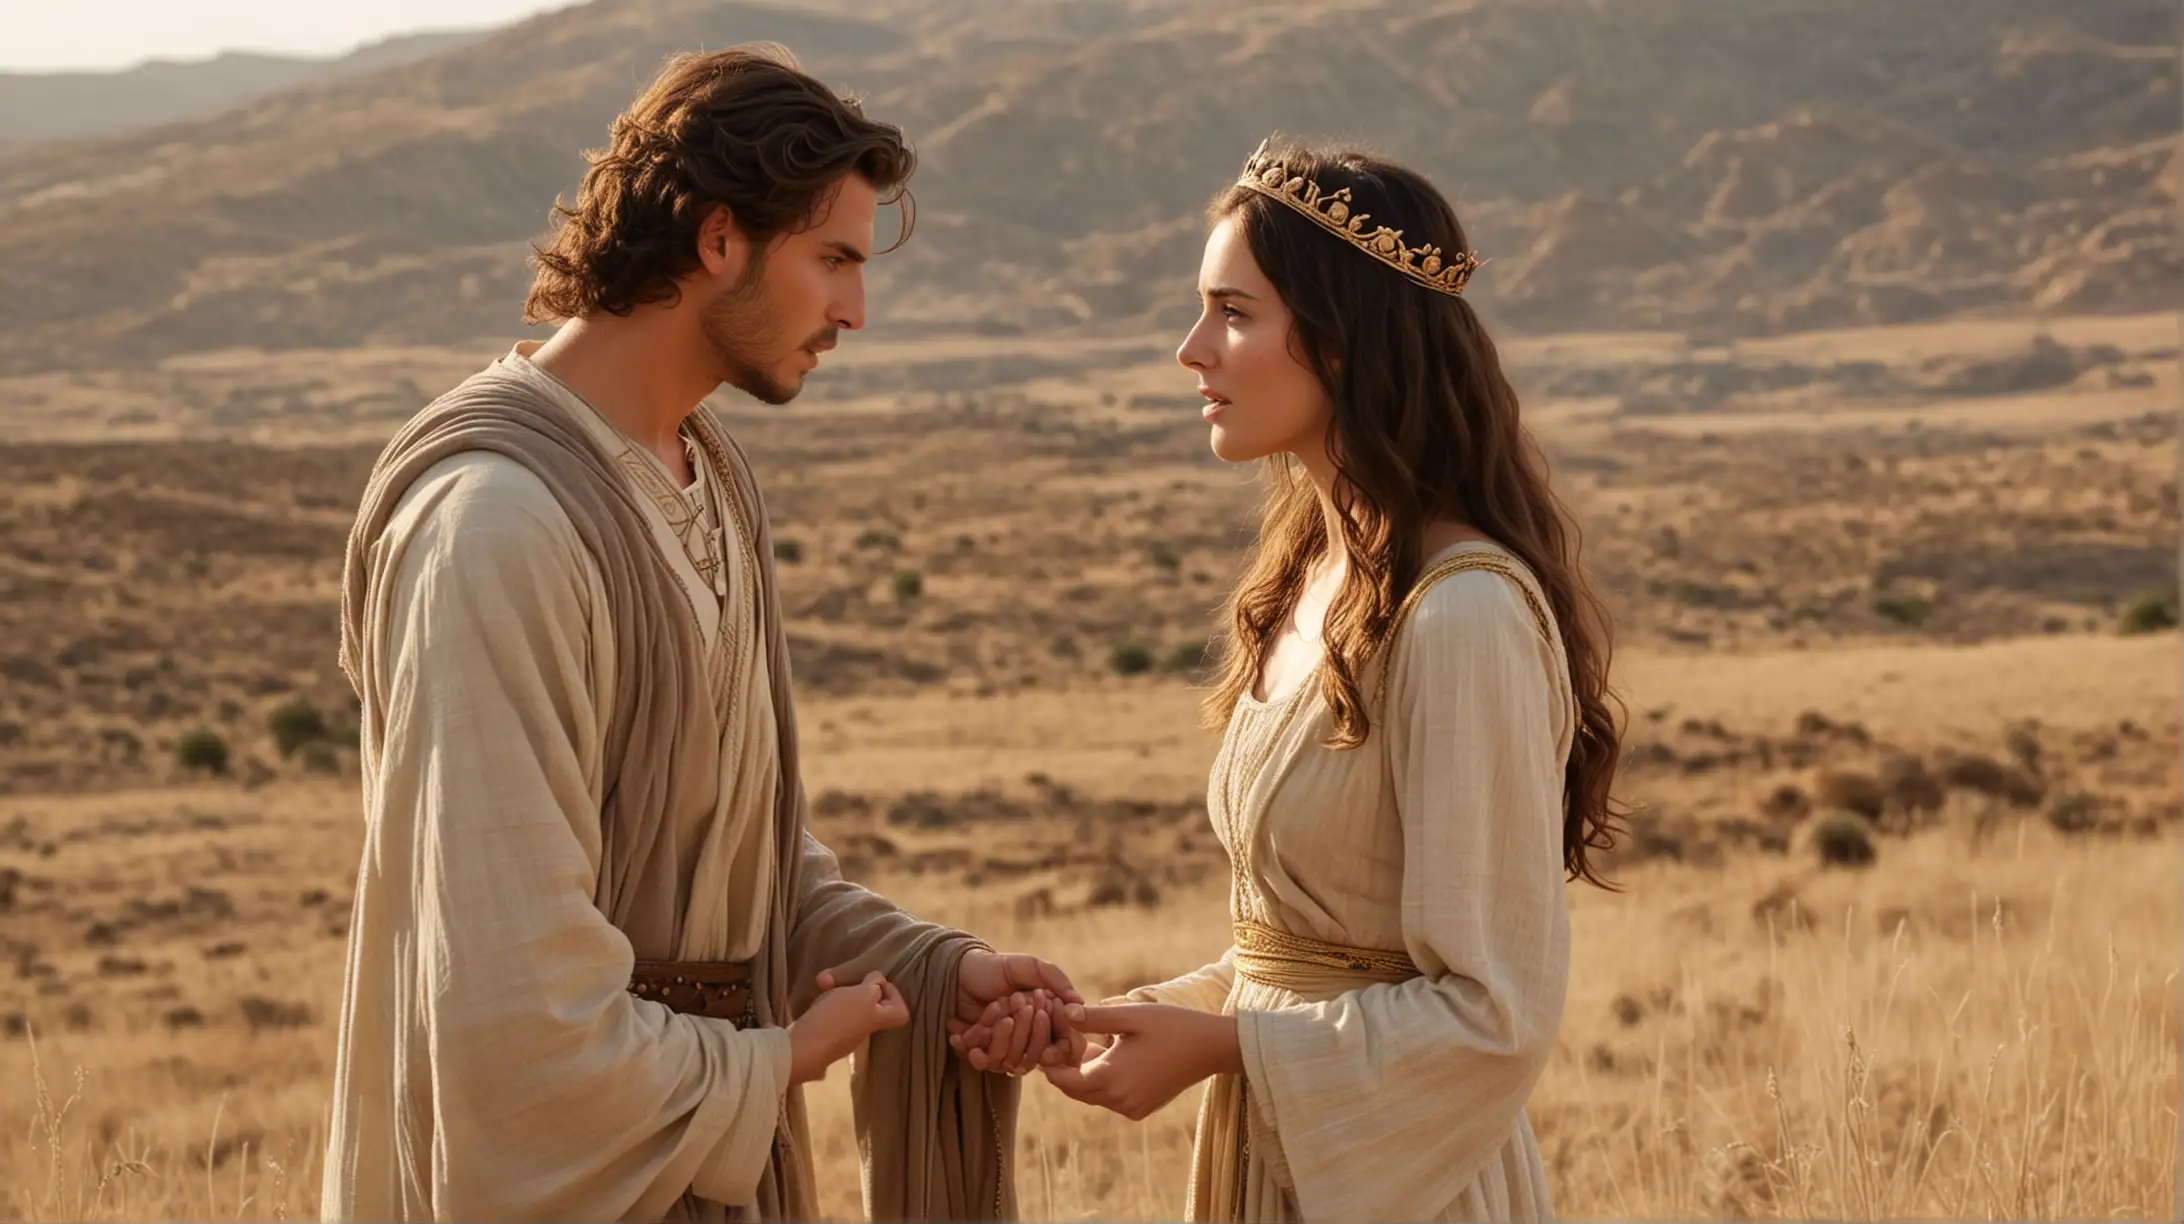 An attractive woman talking to a handsome Young King David on a hilly desert field. Set during the Biblical Era of King David